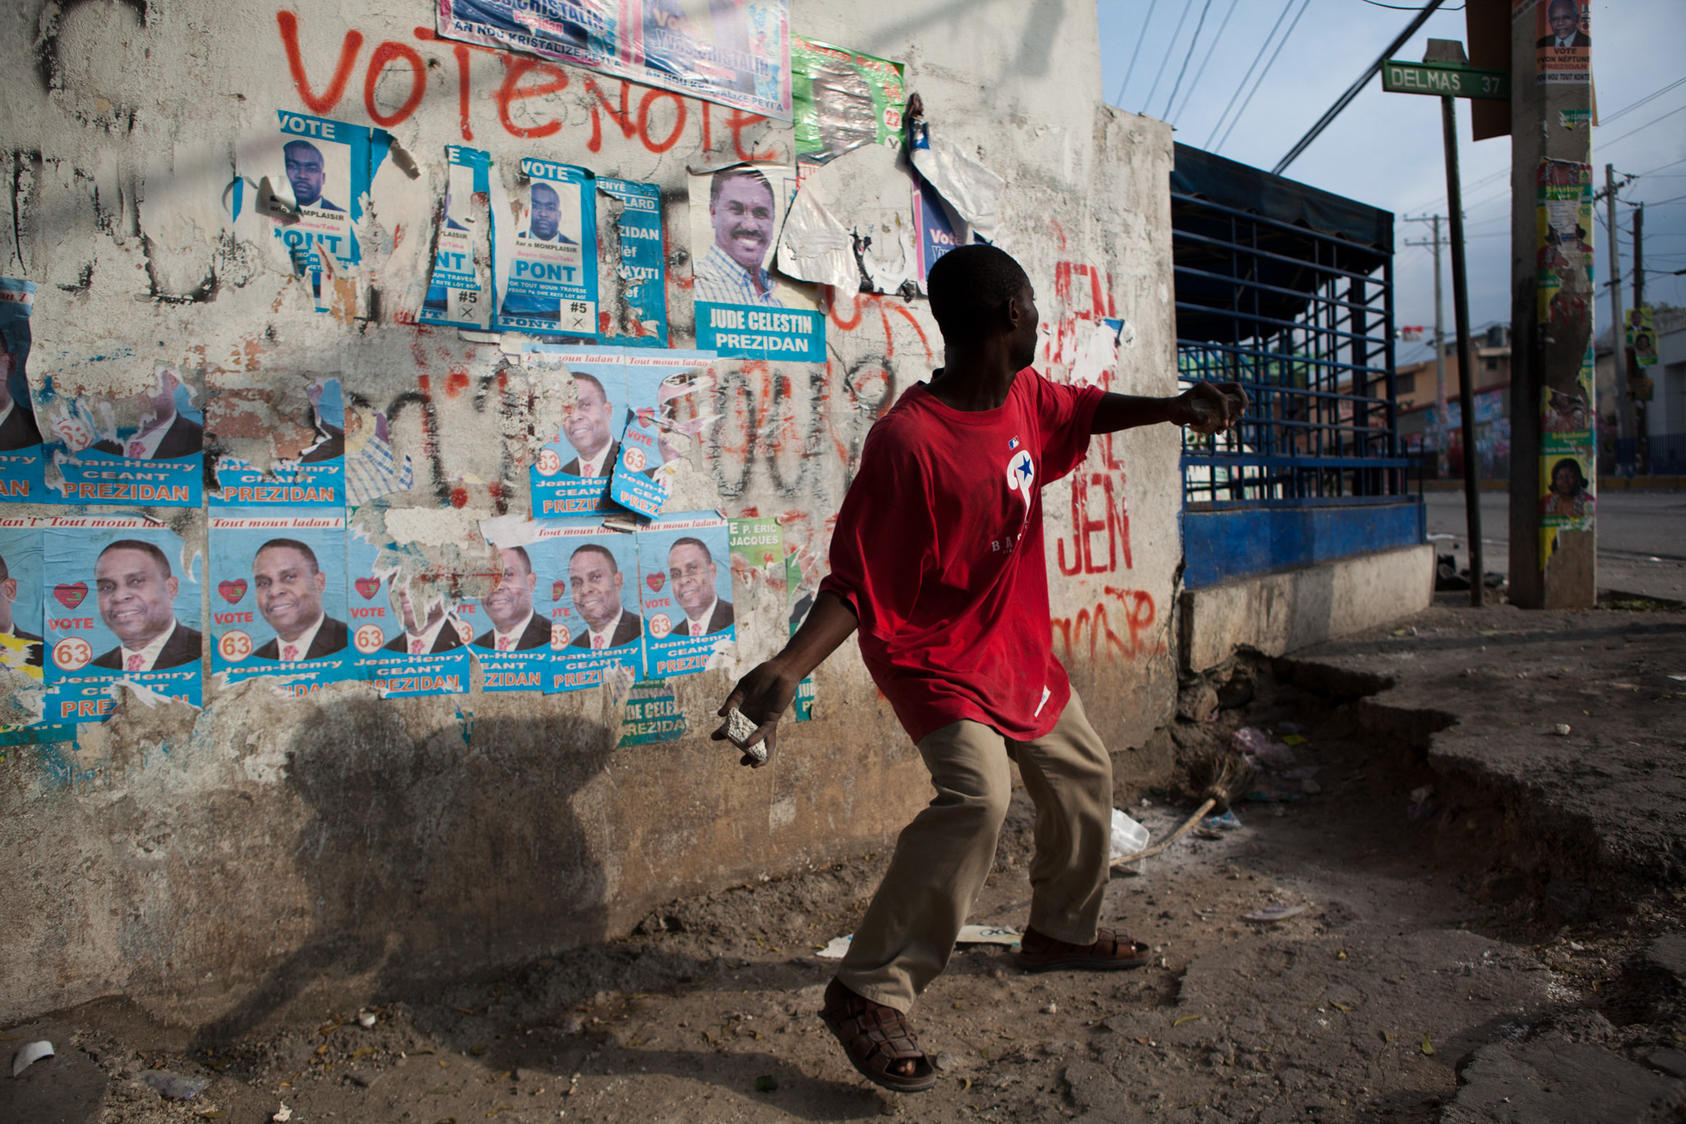 A protester hurls a rock at United Nations peacekeepers outside the electoral board offices in Port-au-Prince, Haiti, on Dec. 8, 2010. Angry protesters torched the headquarters of the government-backed presidential candidate and blocked streets with rubble from earthquake-destroyed buildings hours after the late-night release of preliminary election results triggered violence and new questions about vote rigging.